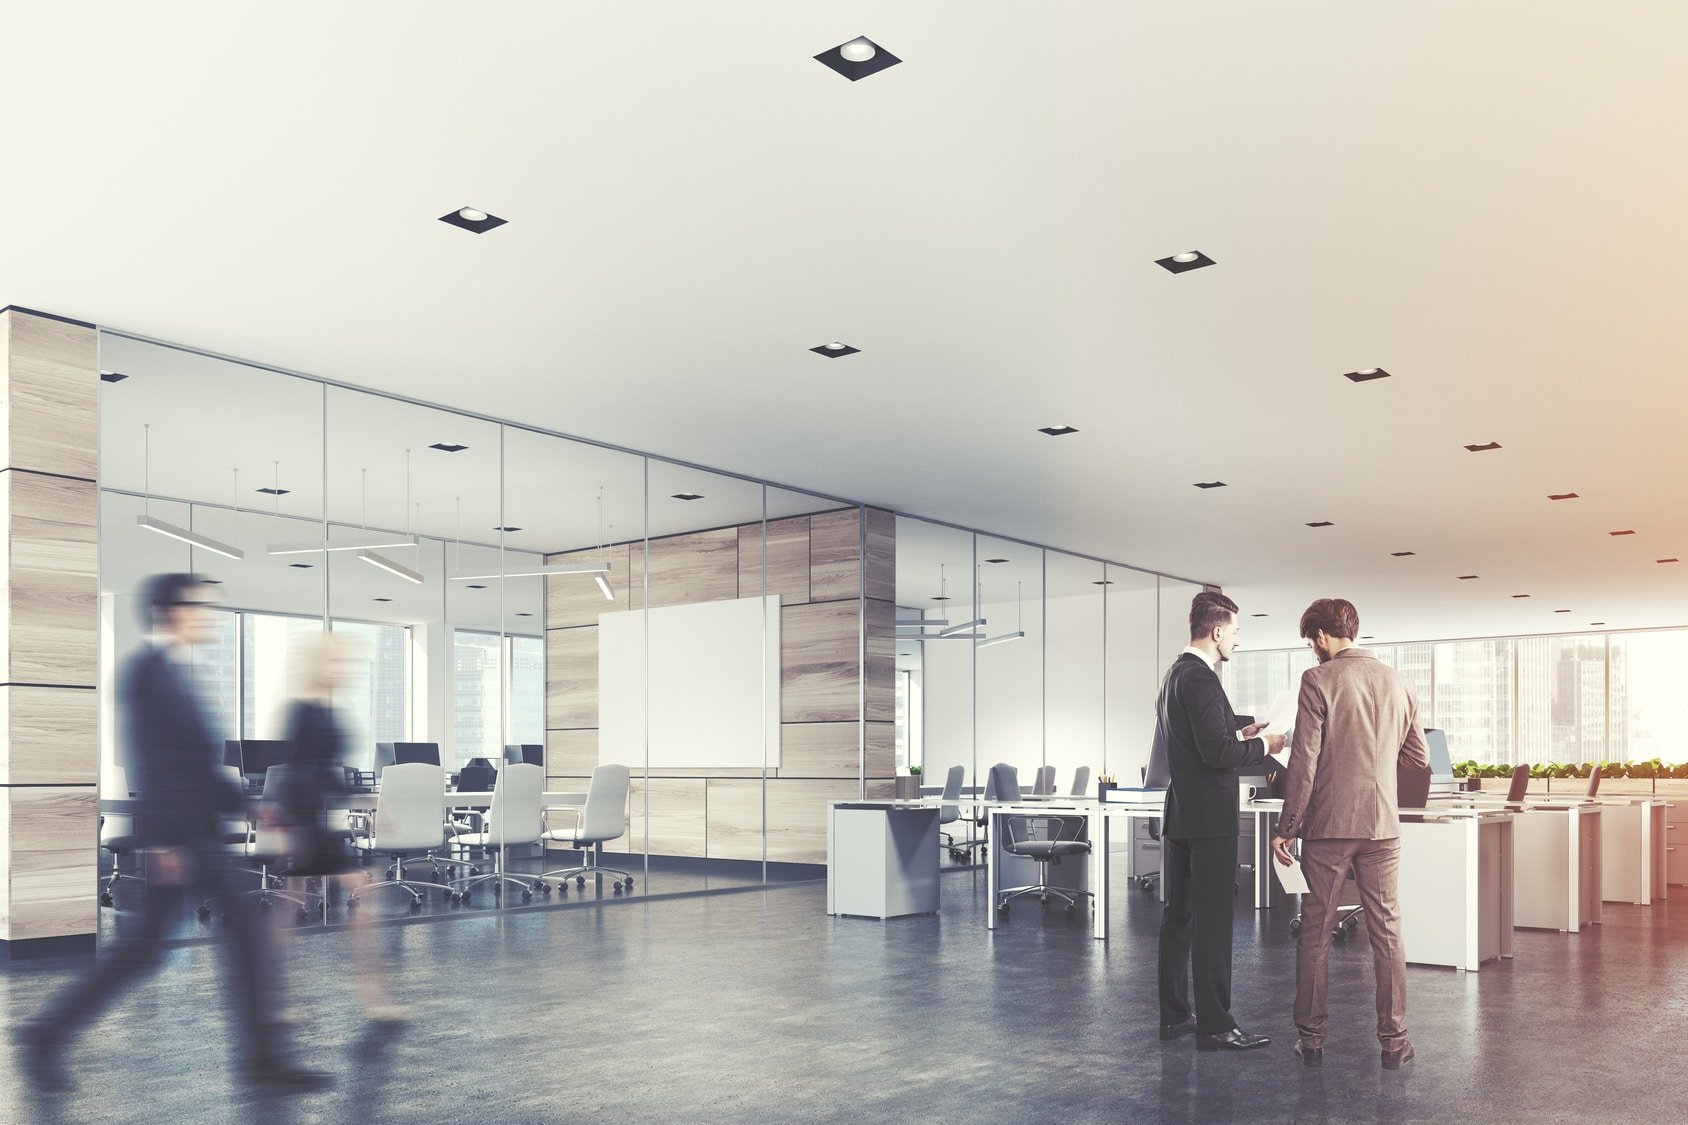 Two conference rooms with glass and wooden walls and an open space open office area. A poster, business people. 3d rendering mock up toned image